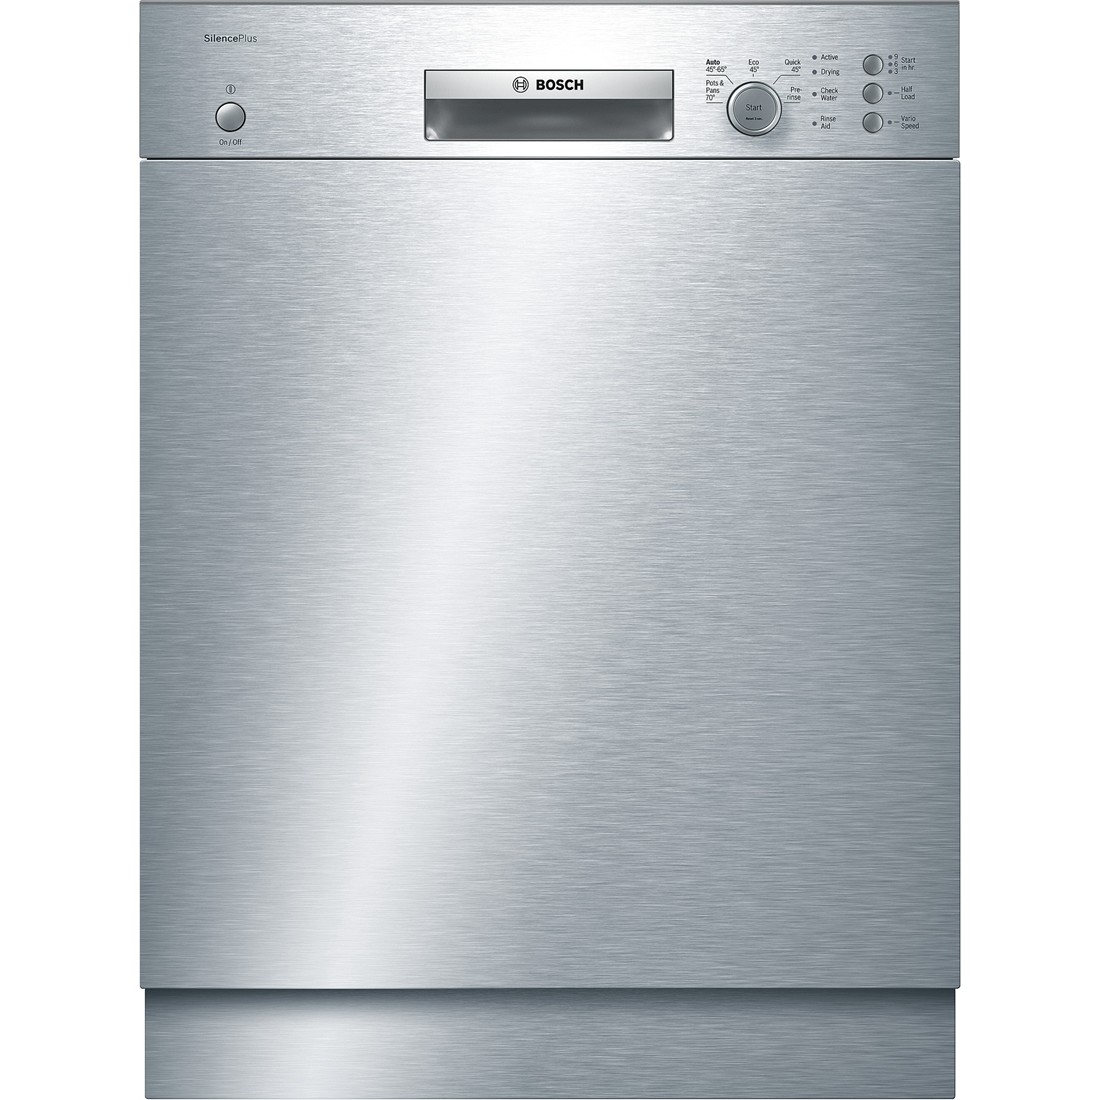 Was there ever a Bosch dishwasher recall?